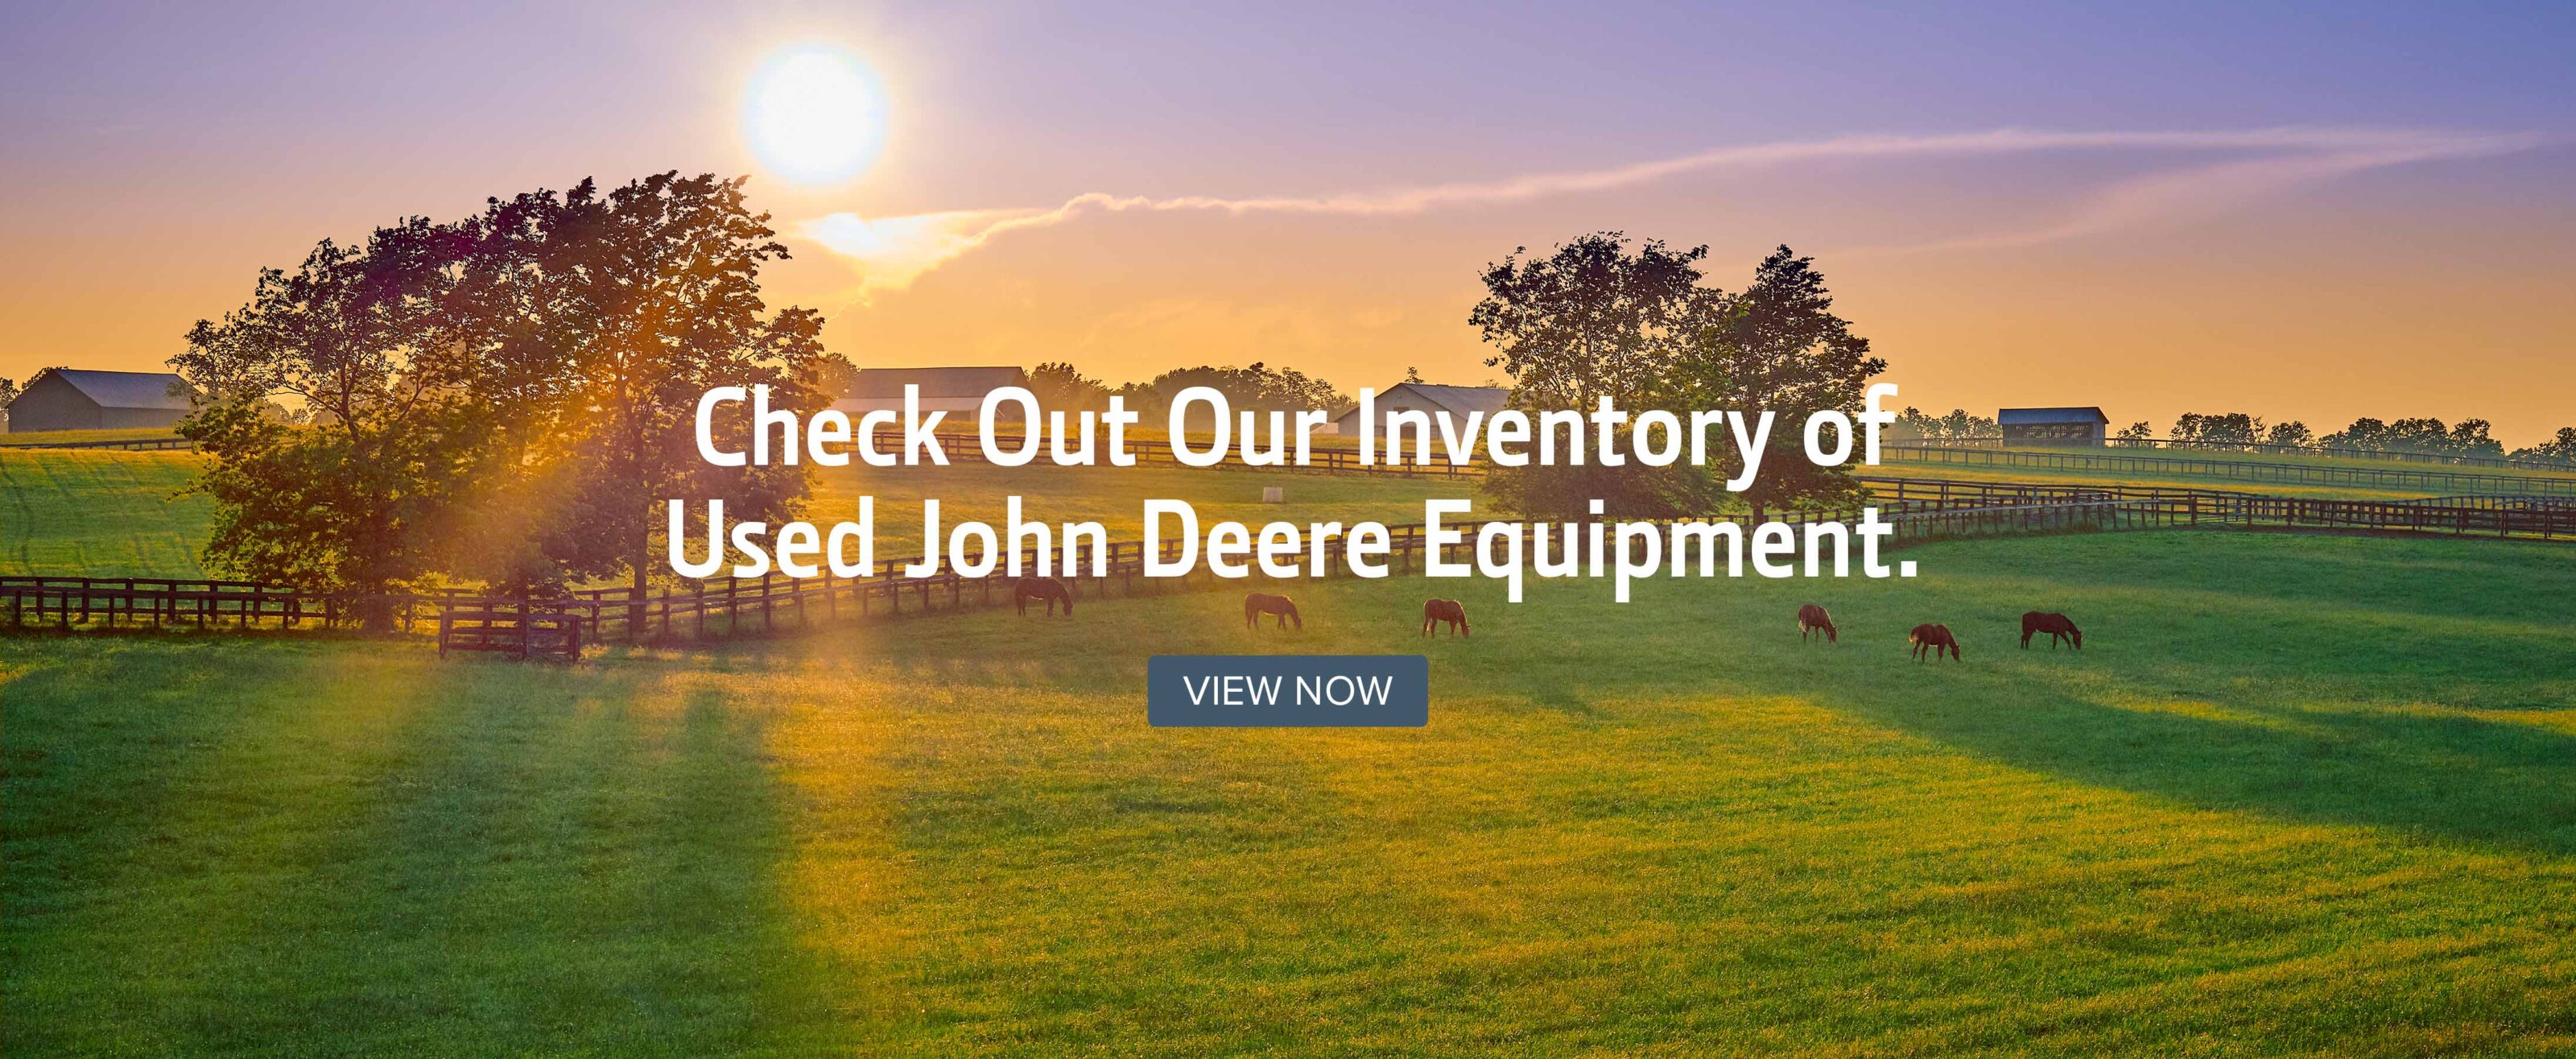 Check Out Our Inventory of Used John Deere Equipment.